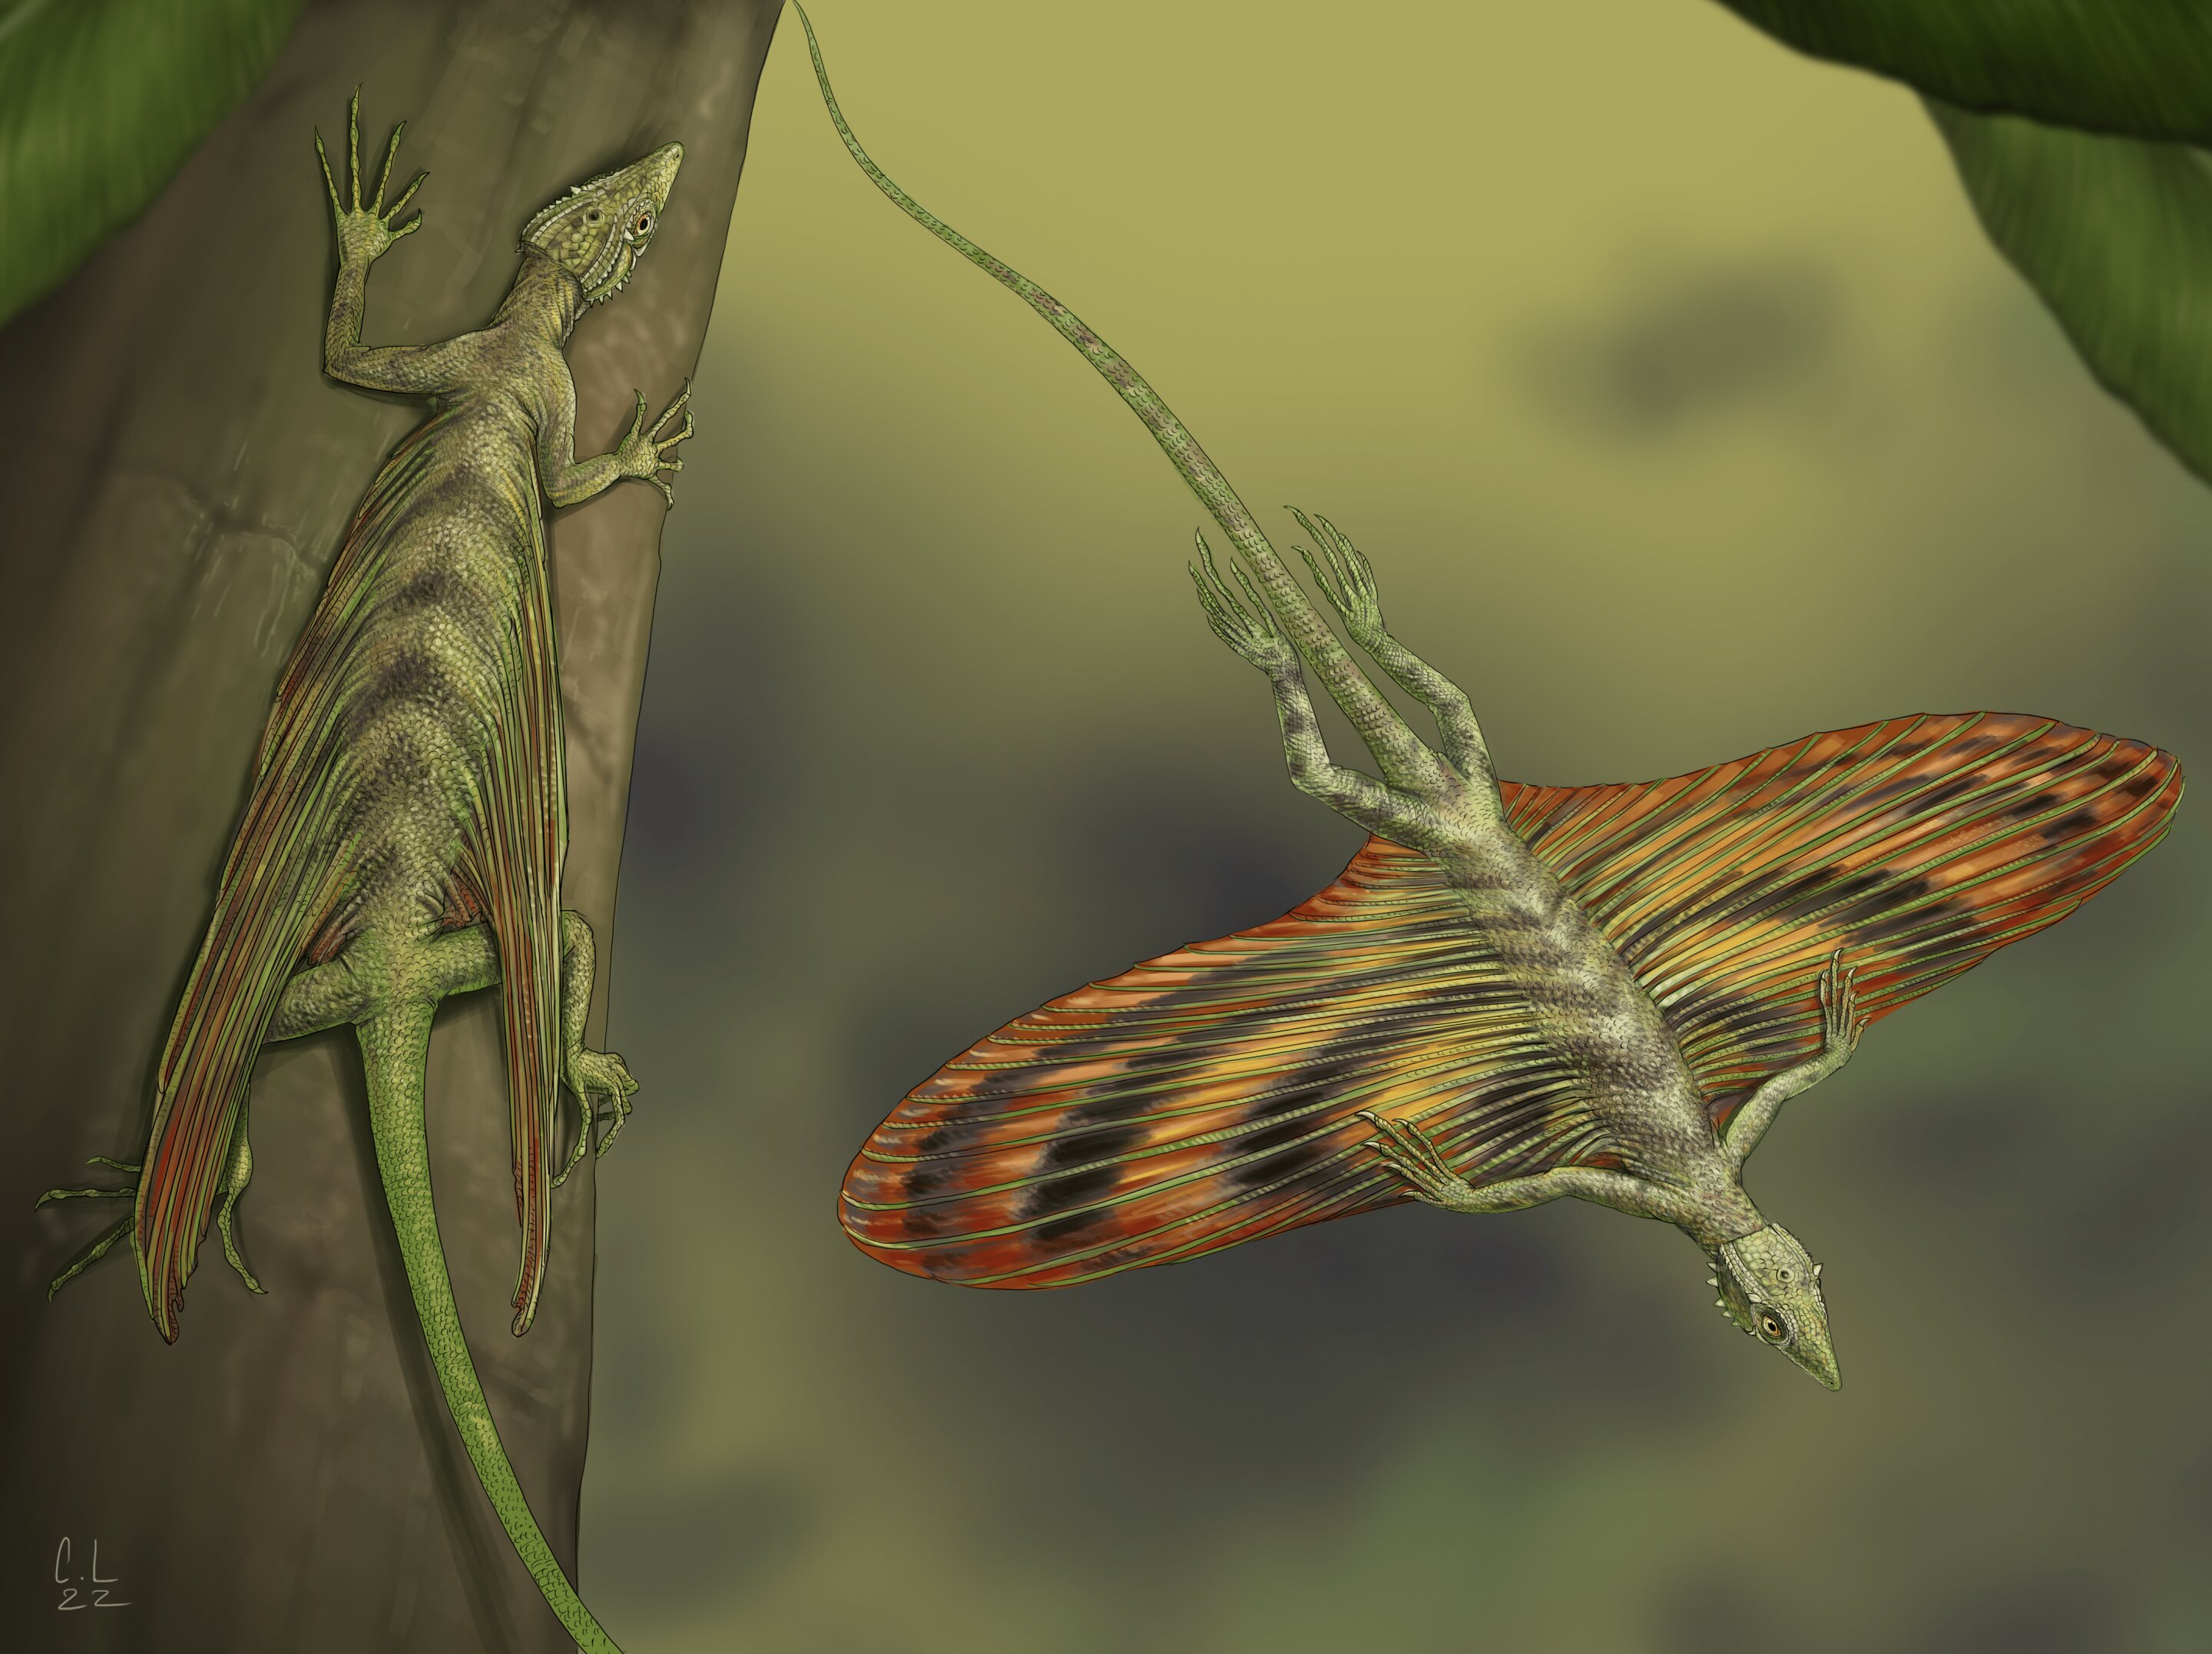 Changes in the tree canopy facilitated the evolution of the first-ever gliding reptile, new study suggests